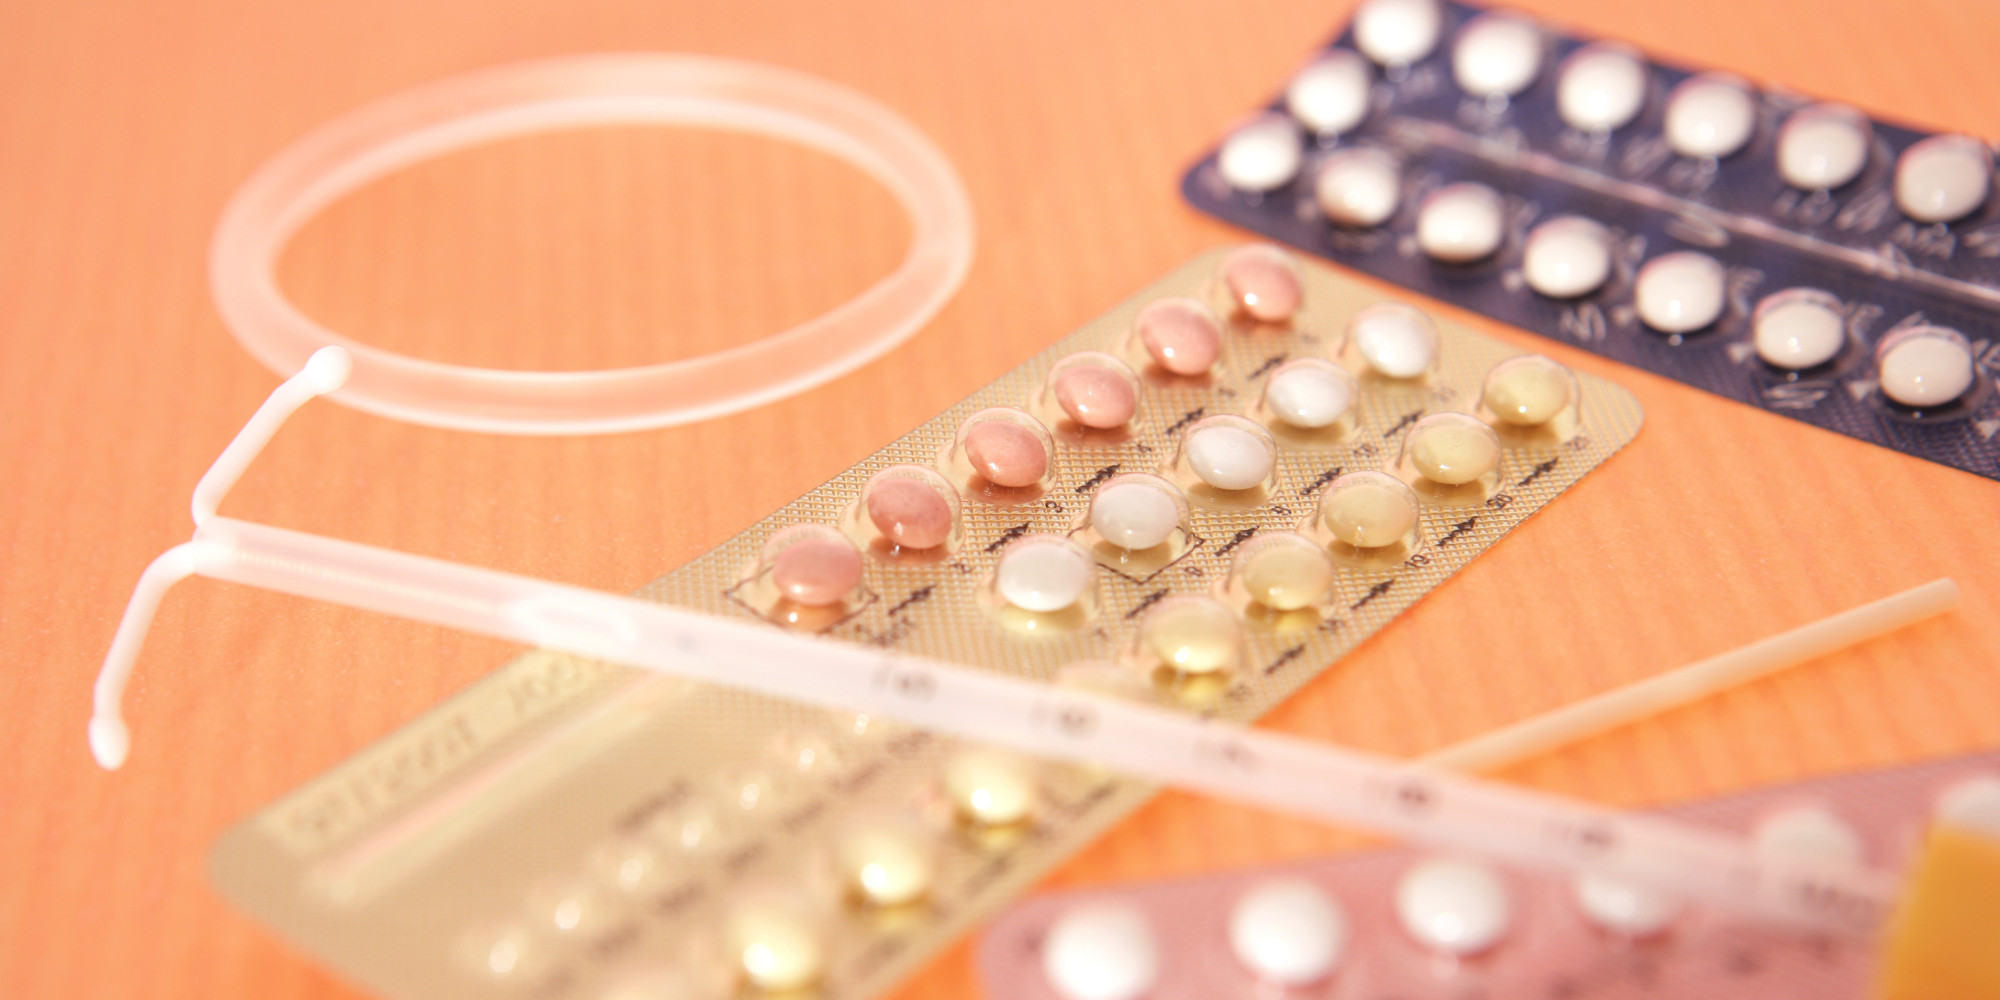 Cost Of Oral Contraceptives 87